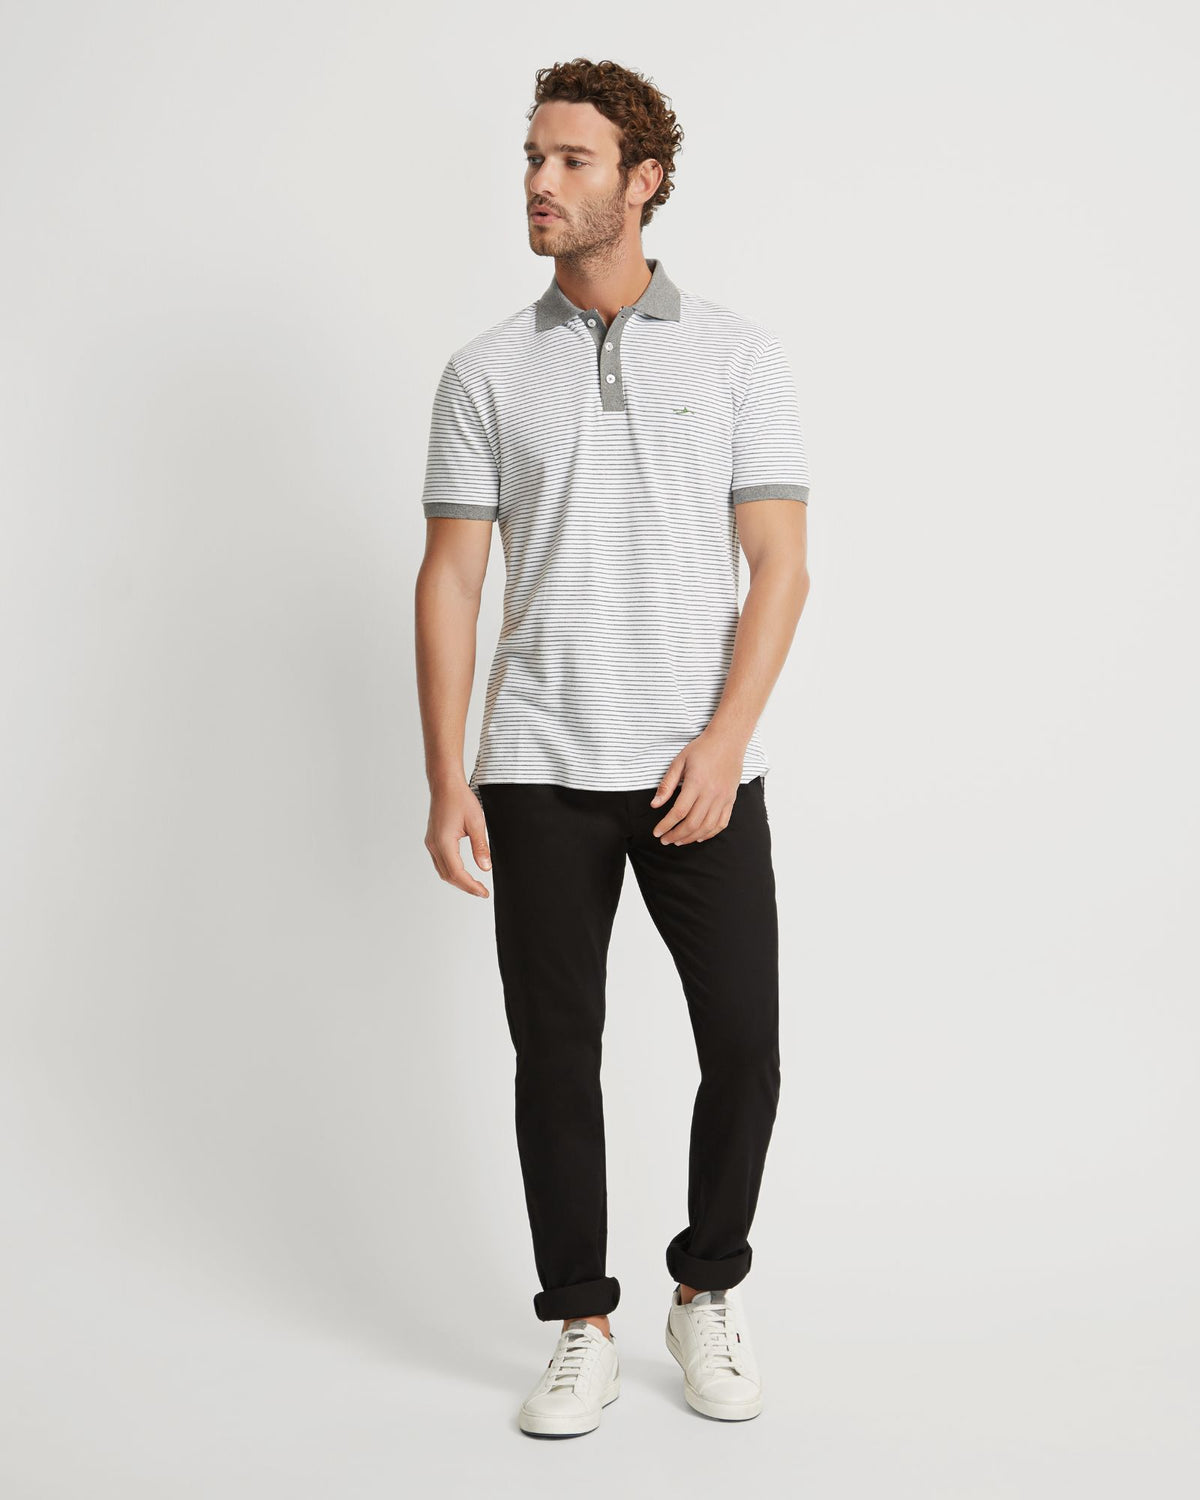 STRETCH SKINNY FIT CHINO - AVAILABLE ~ 1-2 weeks MENS TROUSERS